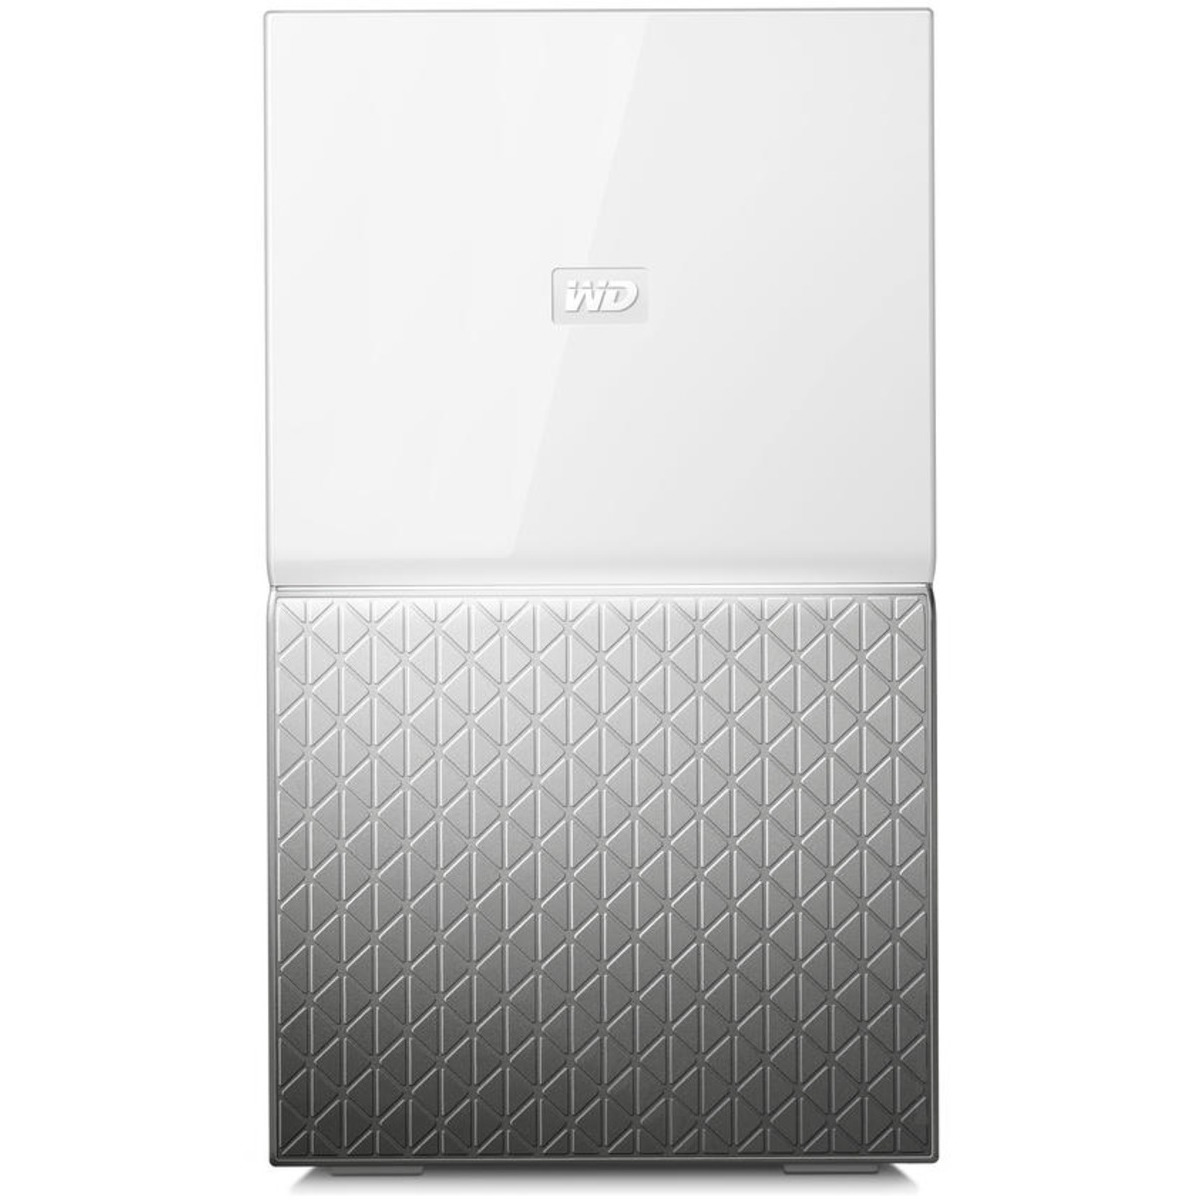 Western Digital My Cloud Home Duo 6tb 2-Bay Desktop Personal / Basic Home / Small Office DAS - Direct Attached Storage Device 1x6tb Western Digital Gold WD6003FRYZ 3.5 7200rpm SATA 6Gb/s HDD ENTERPRISE Class Drives Installed - Burn-In Tested My Cloud Home Duo